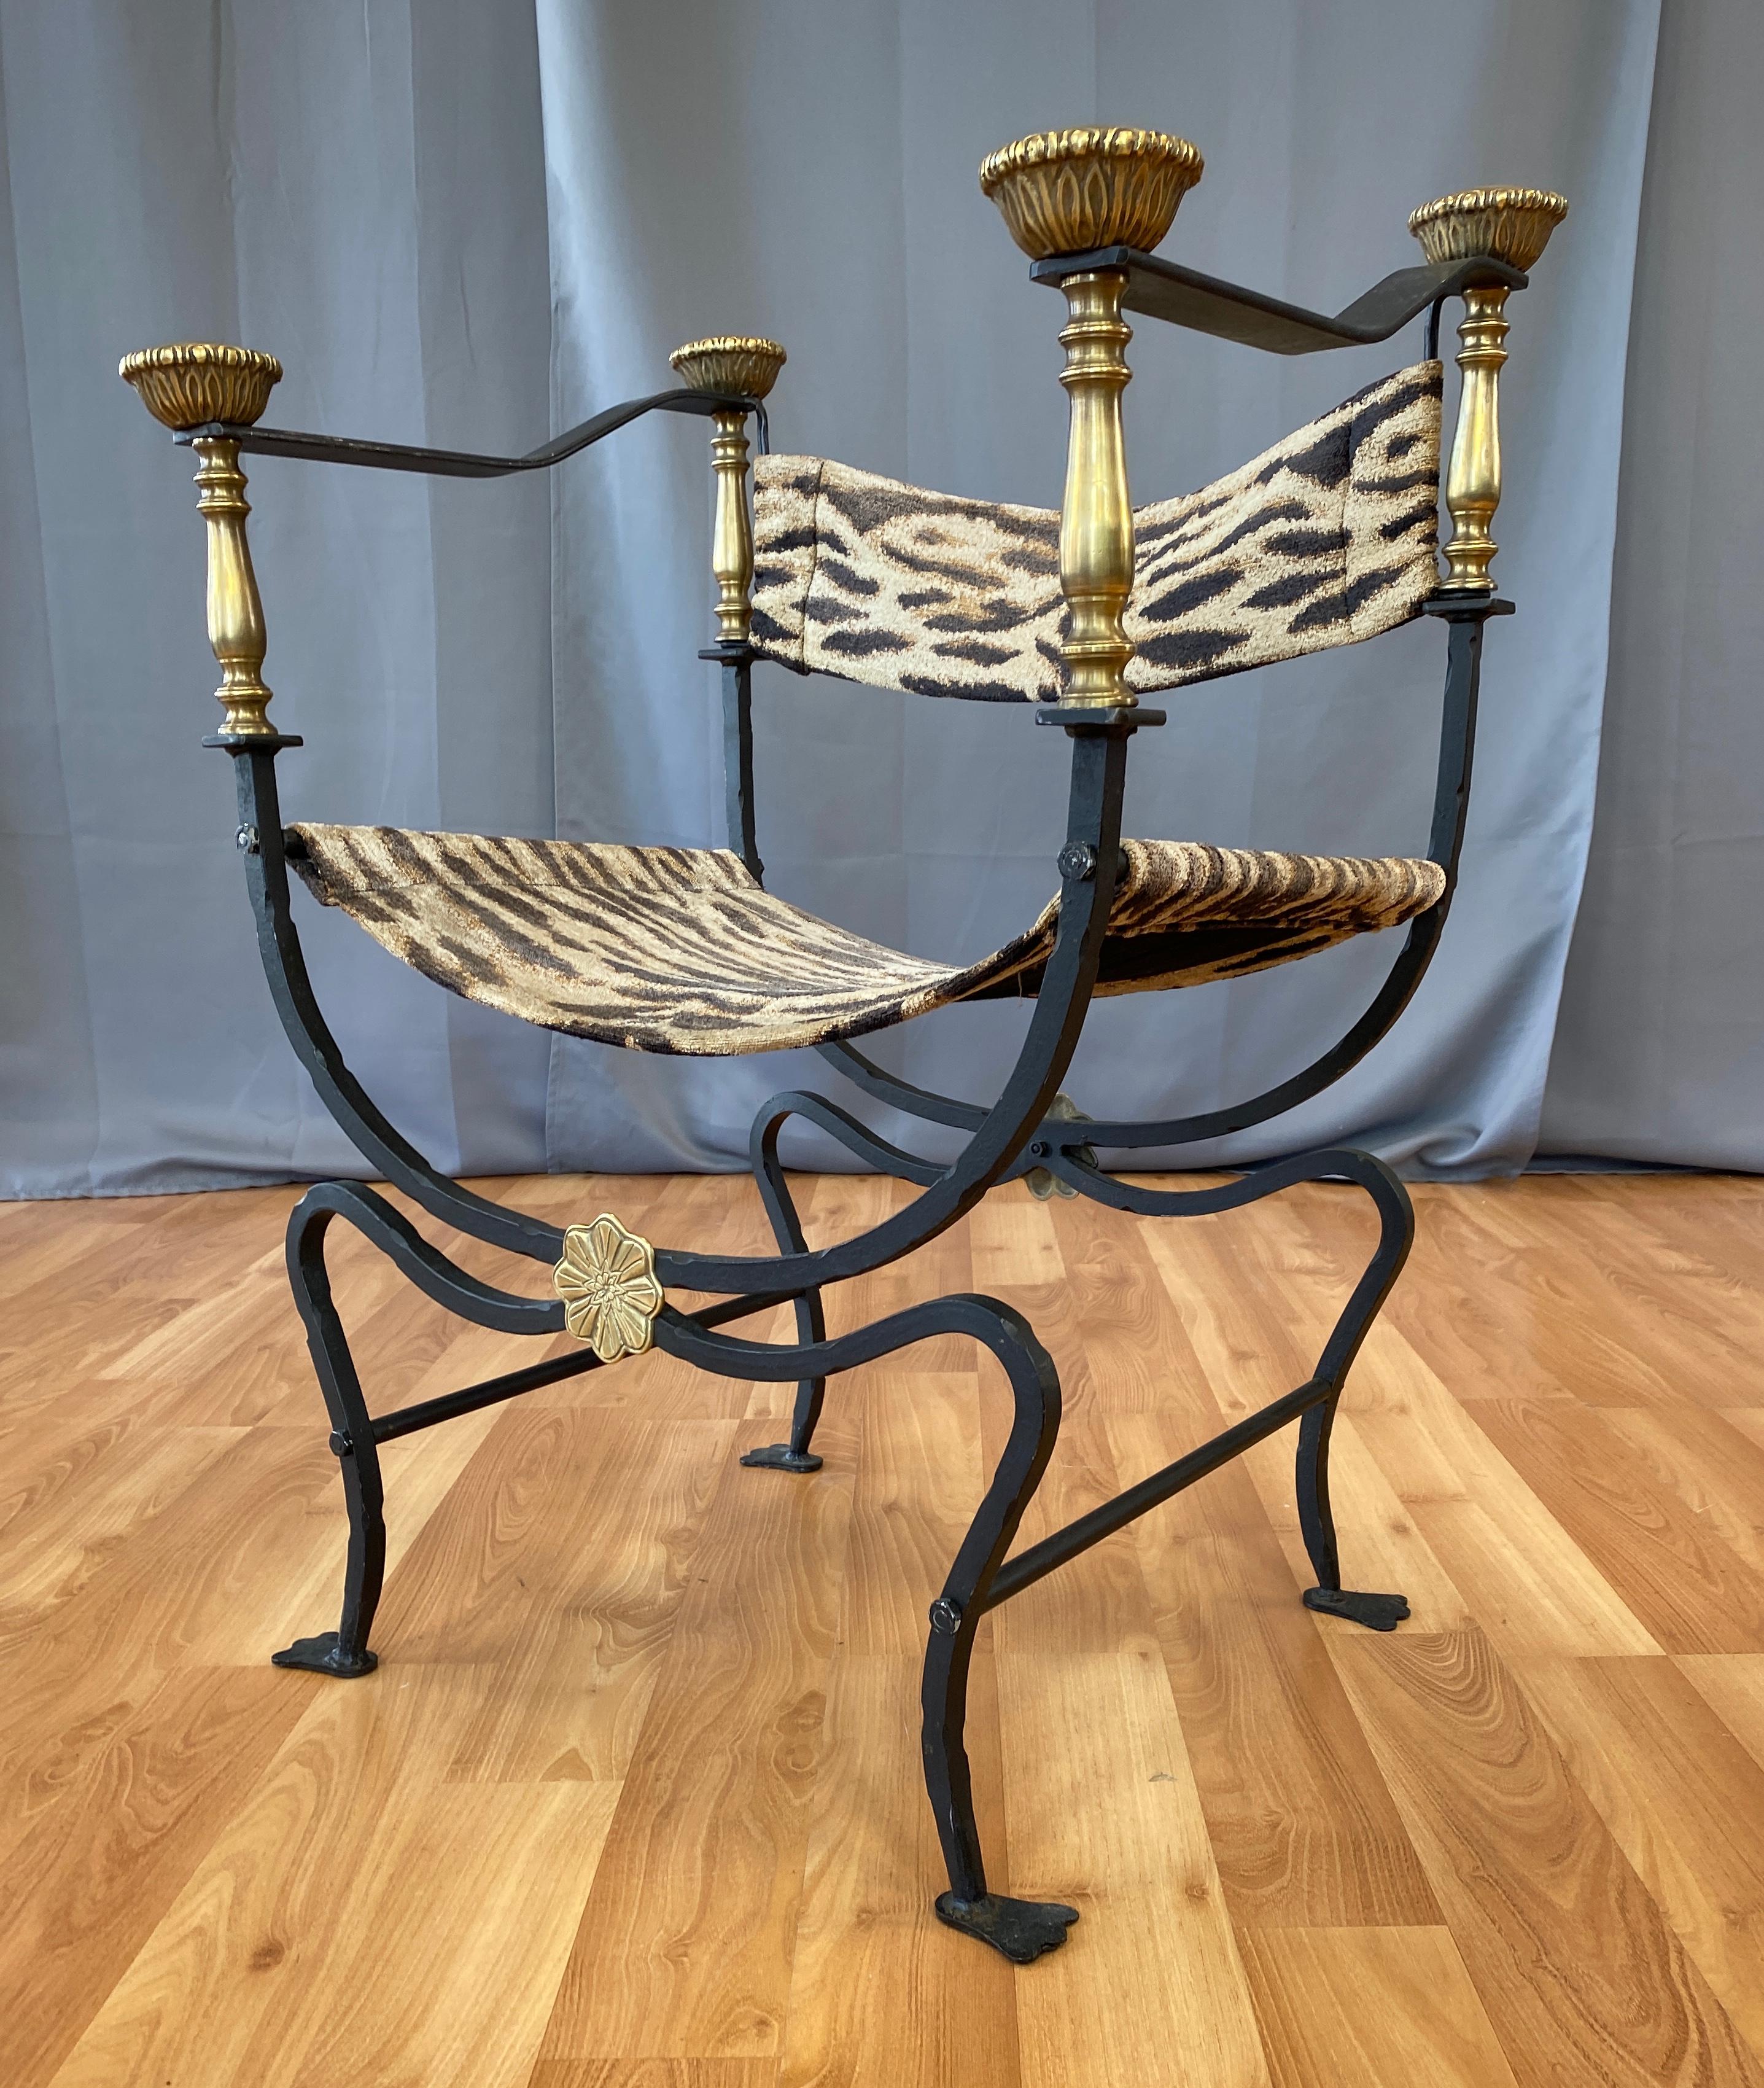 Iron and brass Savonarola style chair, circa 1950s-1960s.
Wrought iron, with brass detailing from the flower medallions on the x bracing up to the crown finials on the arms.
Then you have the whimsical tiger pattern upholstery for the sling seat and